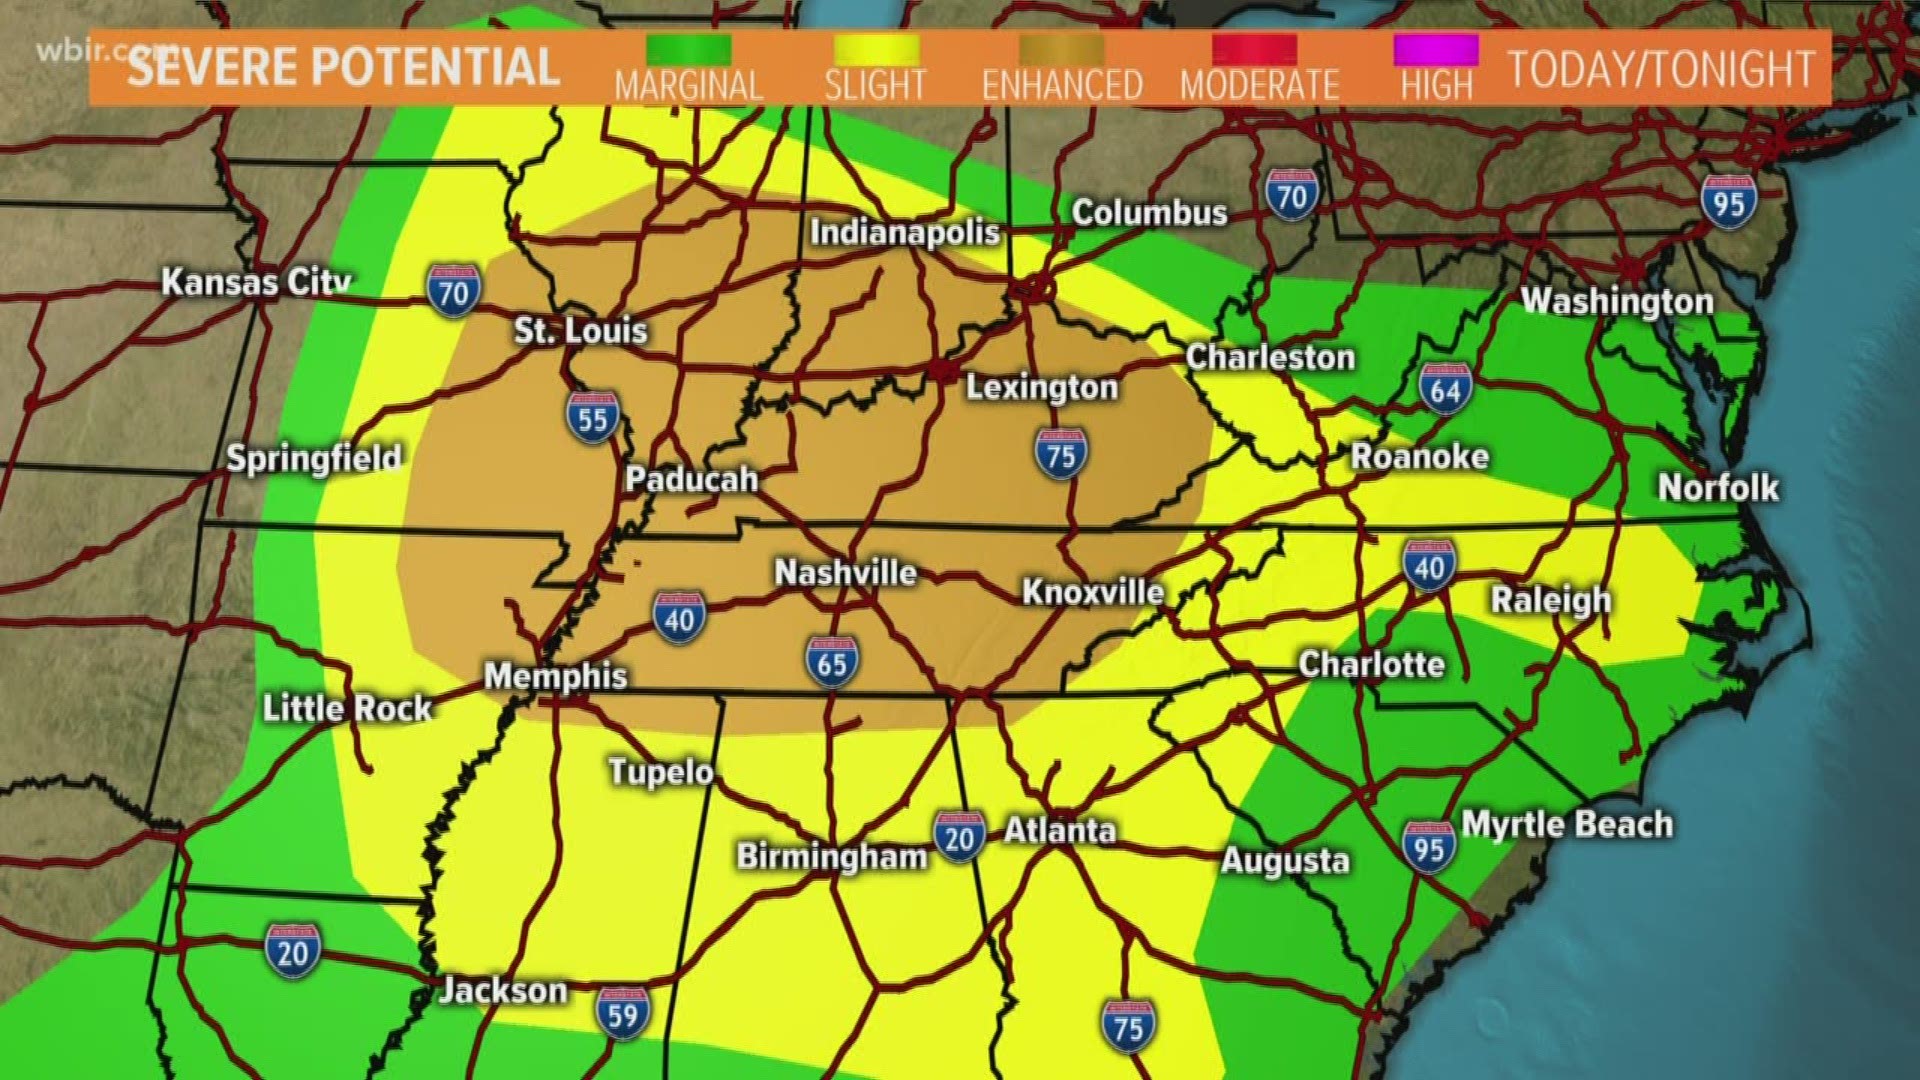 Severe weather possible for East Tennessee through the afternoon and